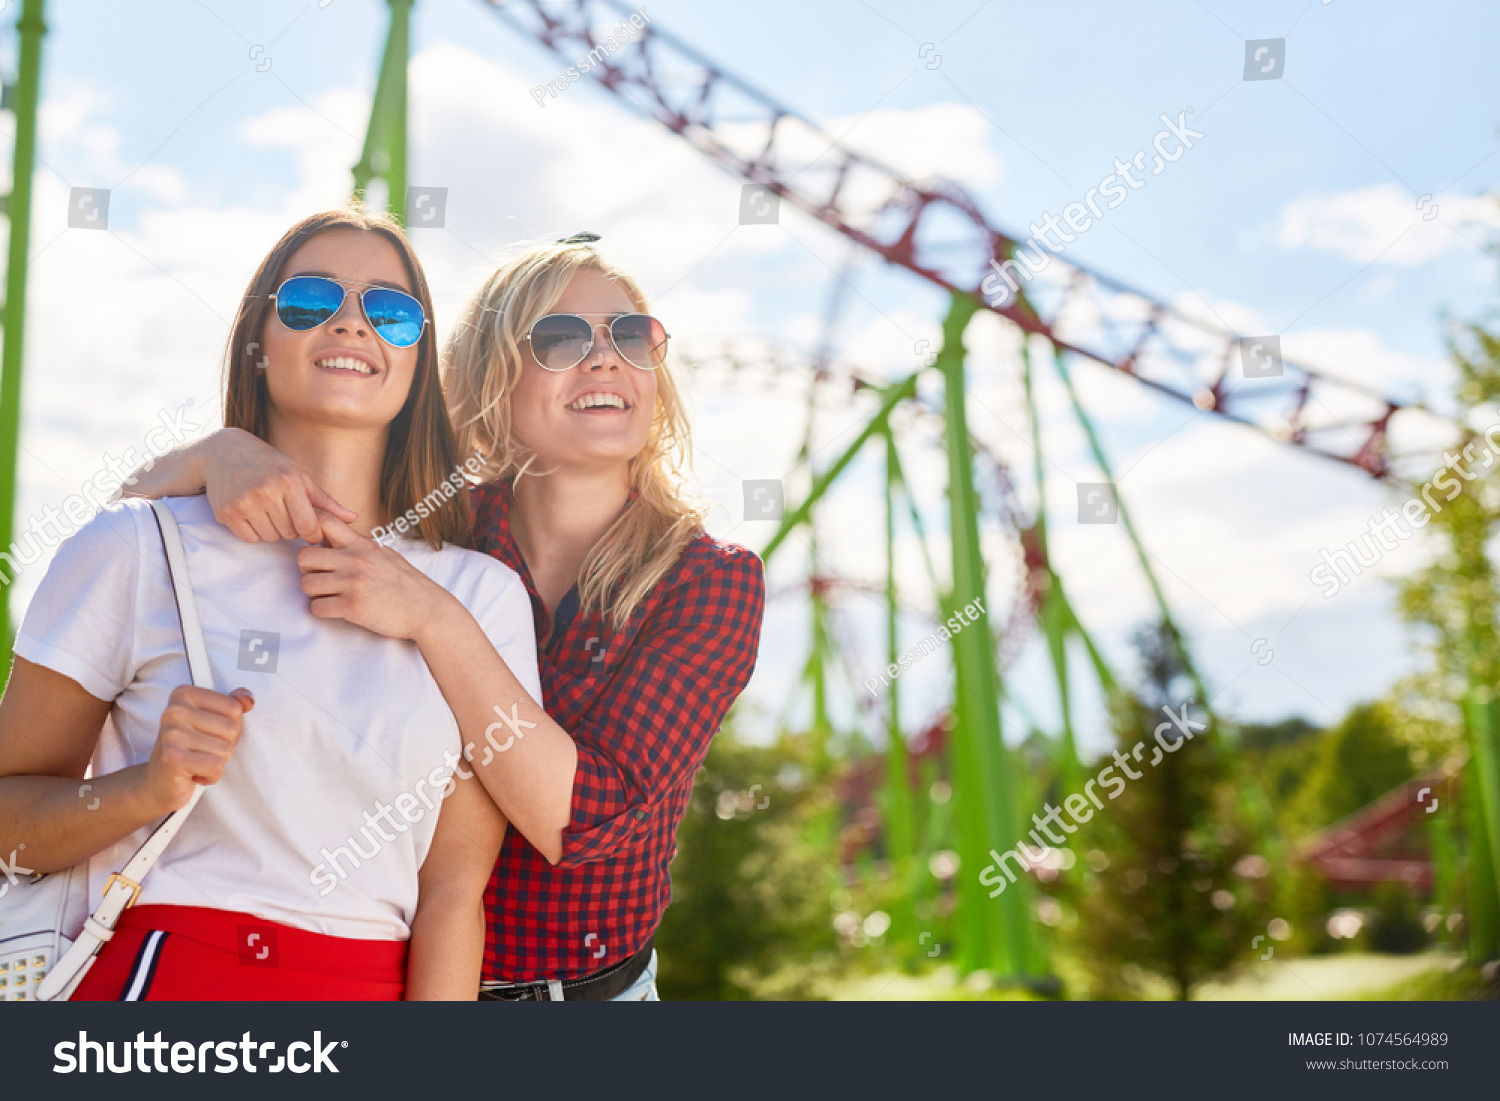 Two affectionate girls in sunglasses looking at one of amusements while spending time in theme park on summer weekend #1074564989